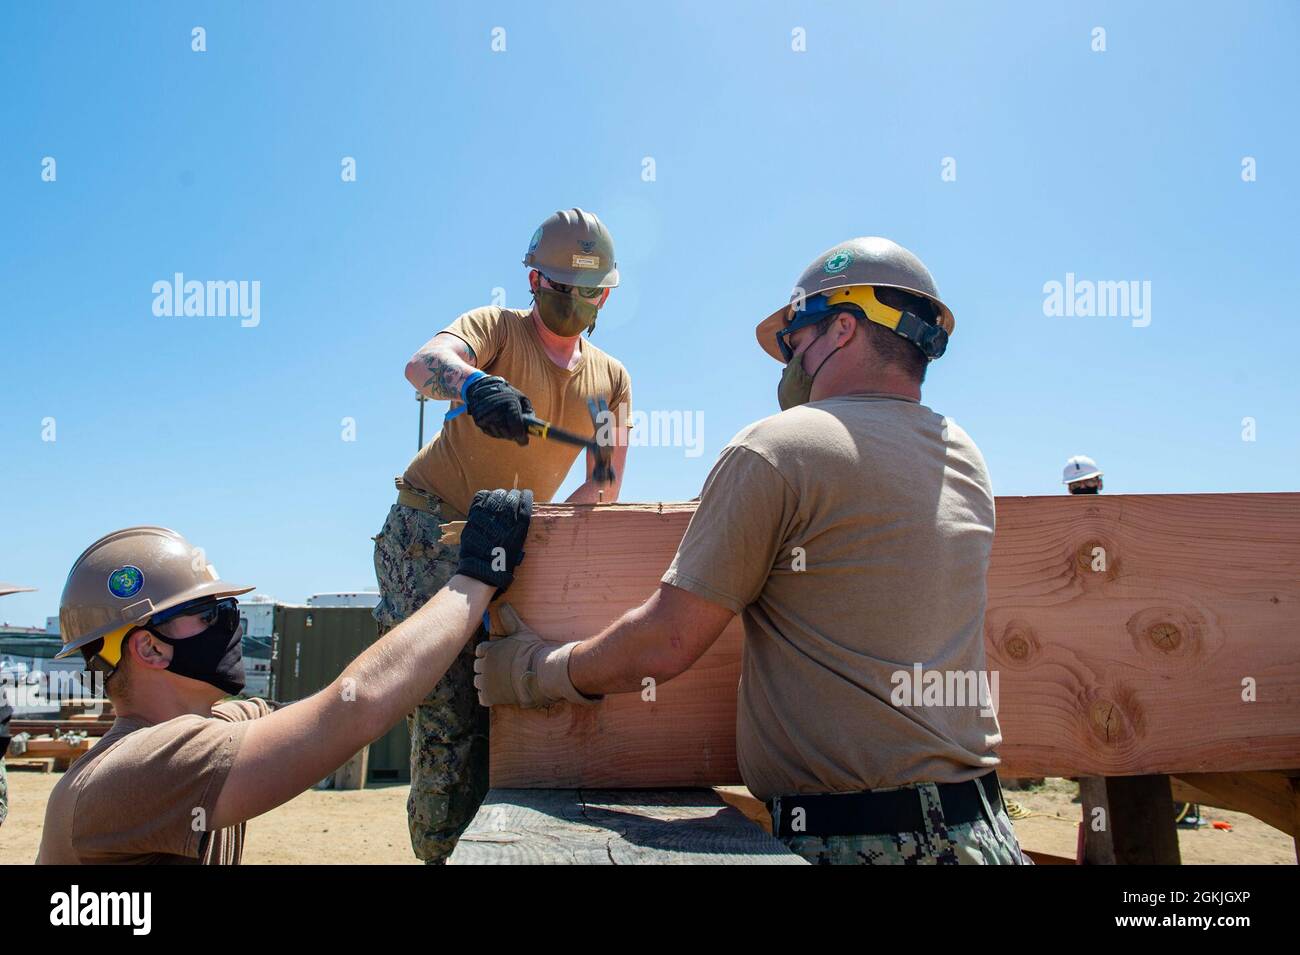 210503-N-TP832-1127 PORT HUENEME, Calif. (May 3, 2021) Builder 3rd Class Joshua Kitchin, assigned to U.S. Naval Mobile Construction Battalion (NMCB) 3, hammers a nail to construct a heavy timber bridge as part of a Command Post Exercise on board Naval Base Ventura County, Port Hueneme. Seabees are the expeditionary engineering and construction experts of the naval service. They provide task-tailored, adaptable and combat-ready engineering and construction forces that deploy to support Navy objectives globally. Stock Photo